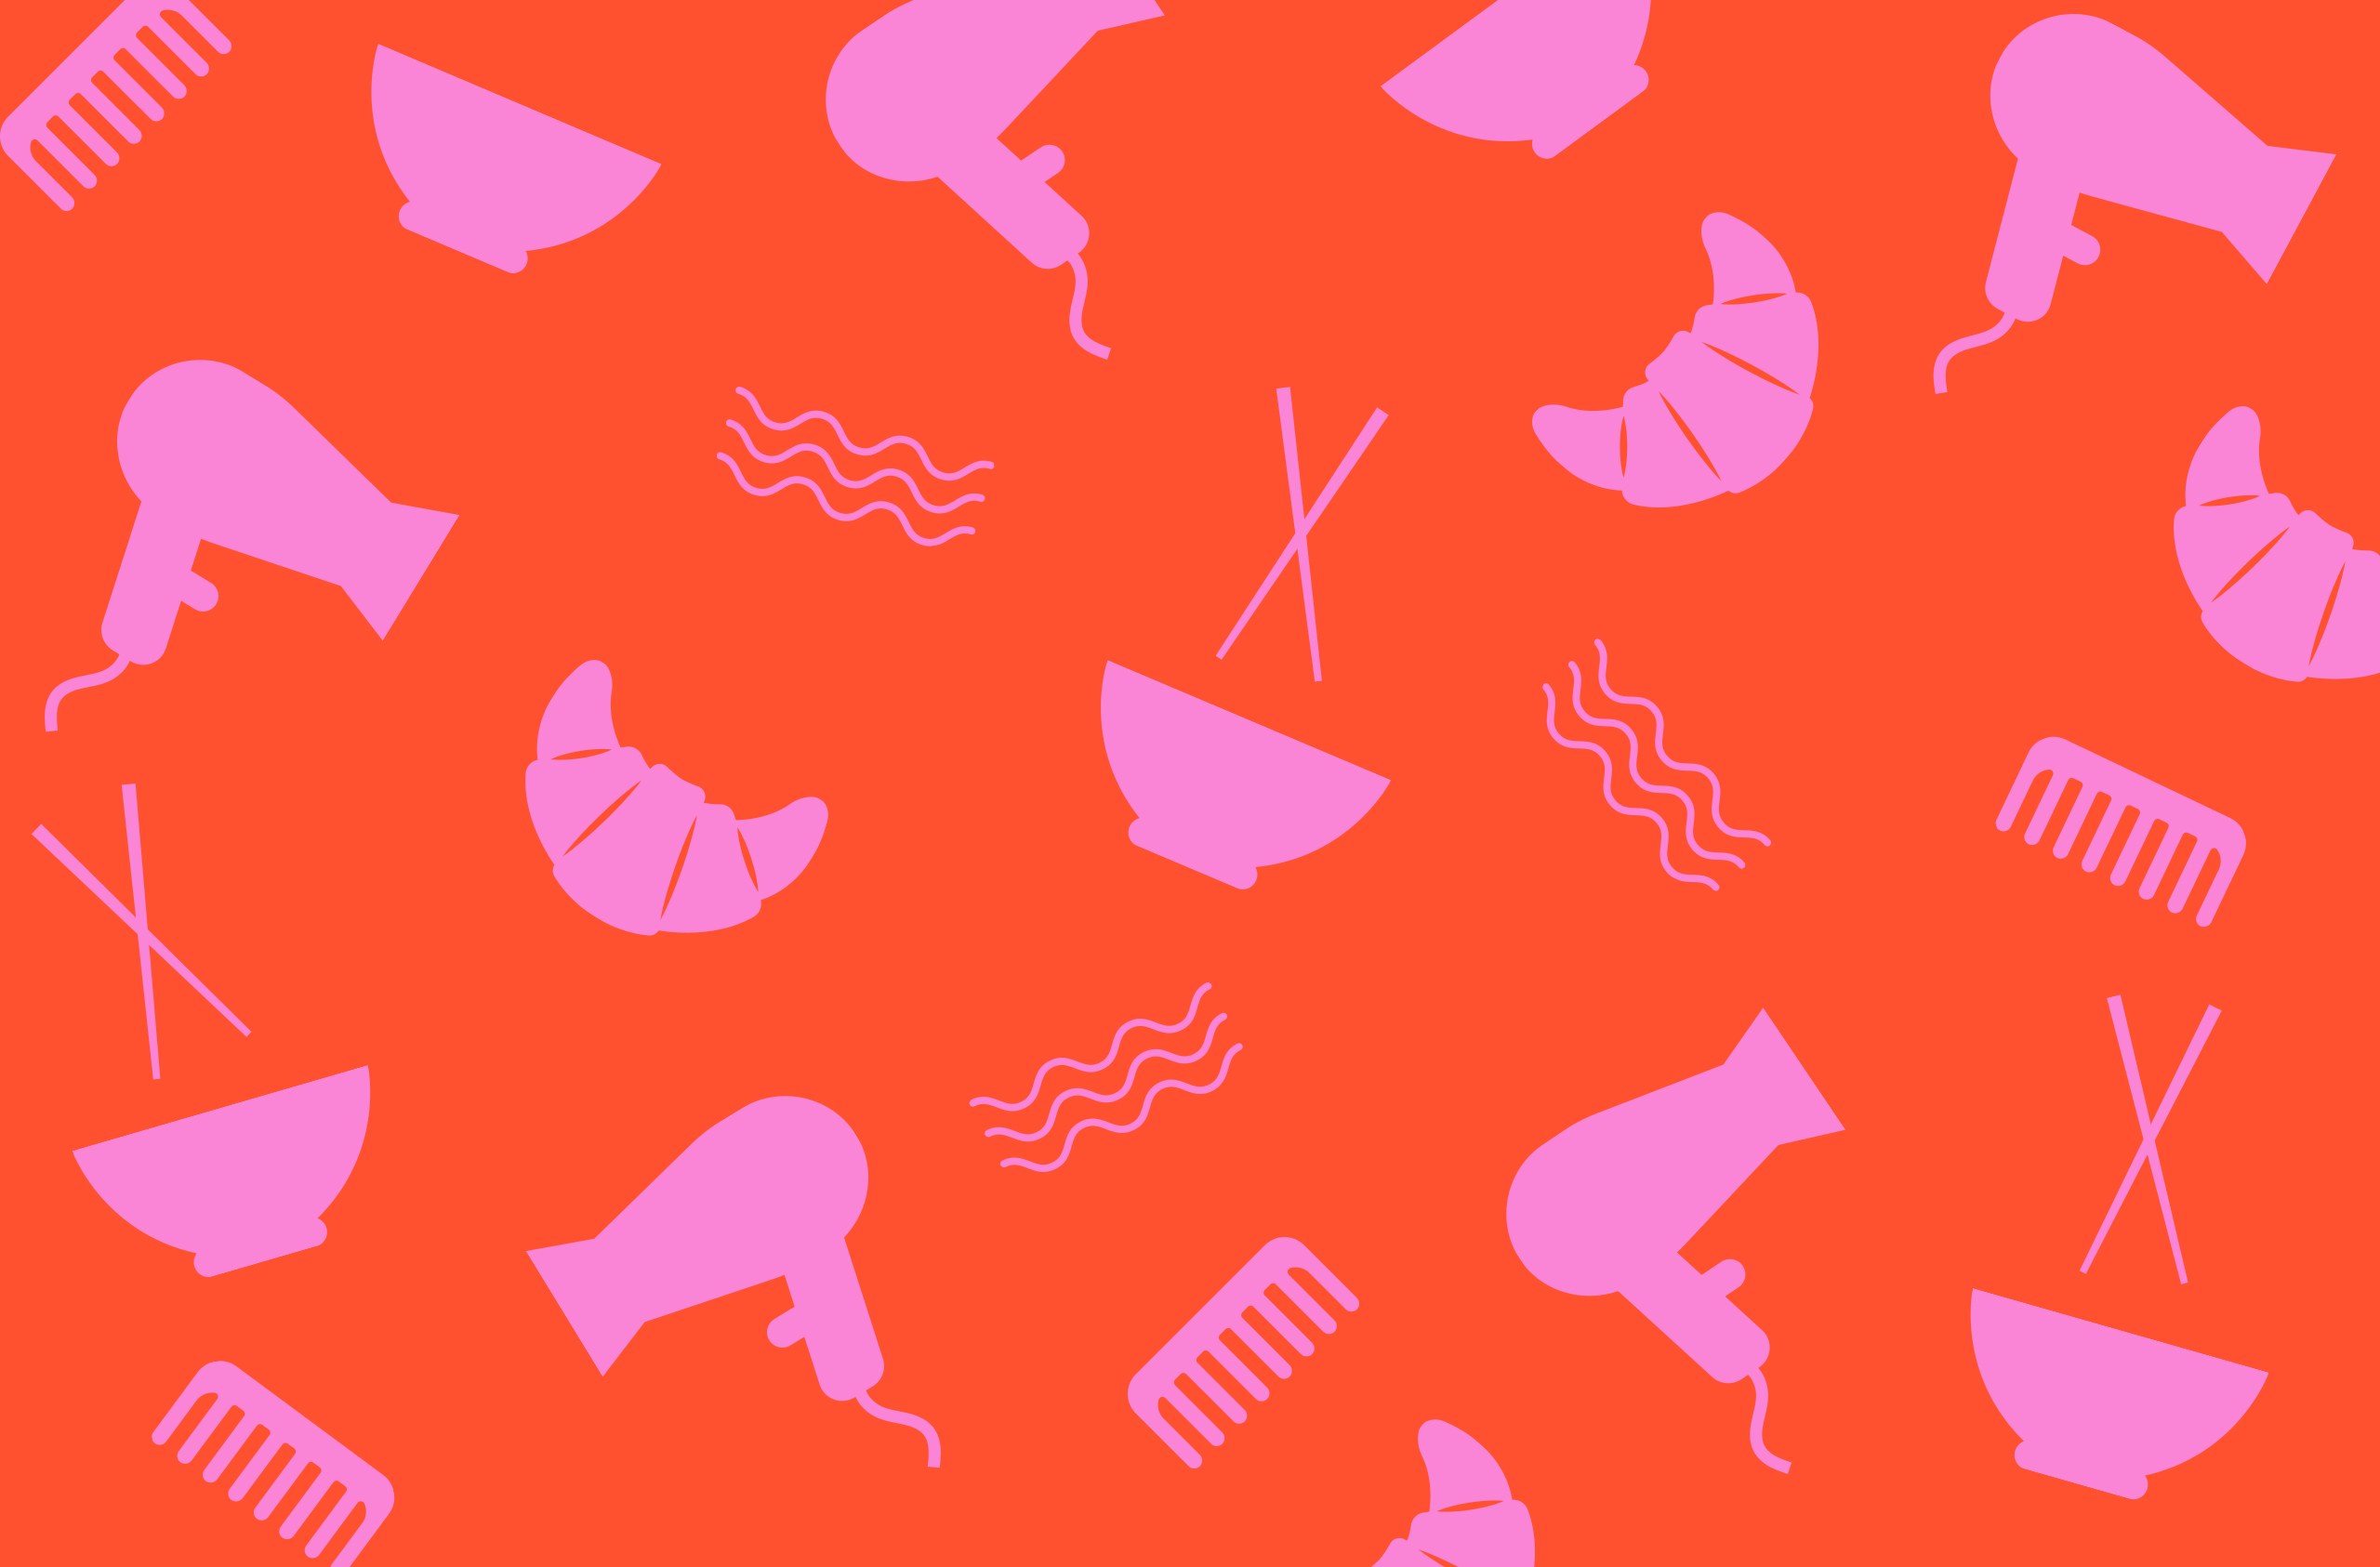 Unit 9 pattern, showing bright pink hairdryers, Bowls, combs and croissants